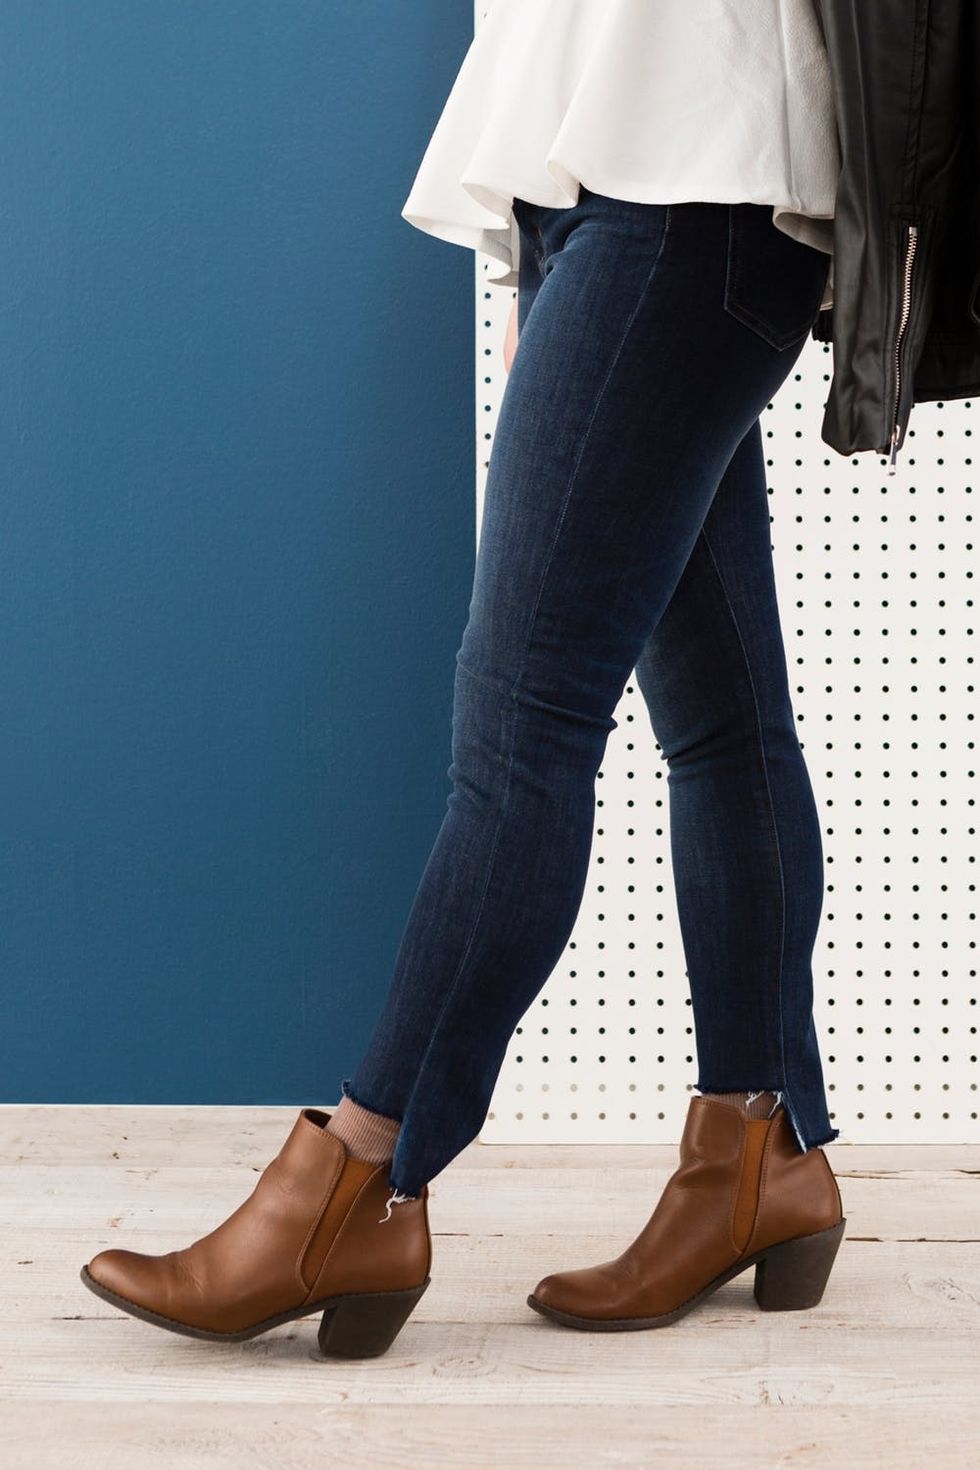 Petite-Girl Problems Solved With These Easy Denim Hem Hacks - Brit + Co